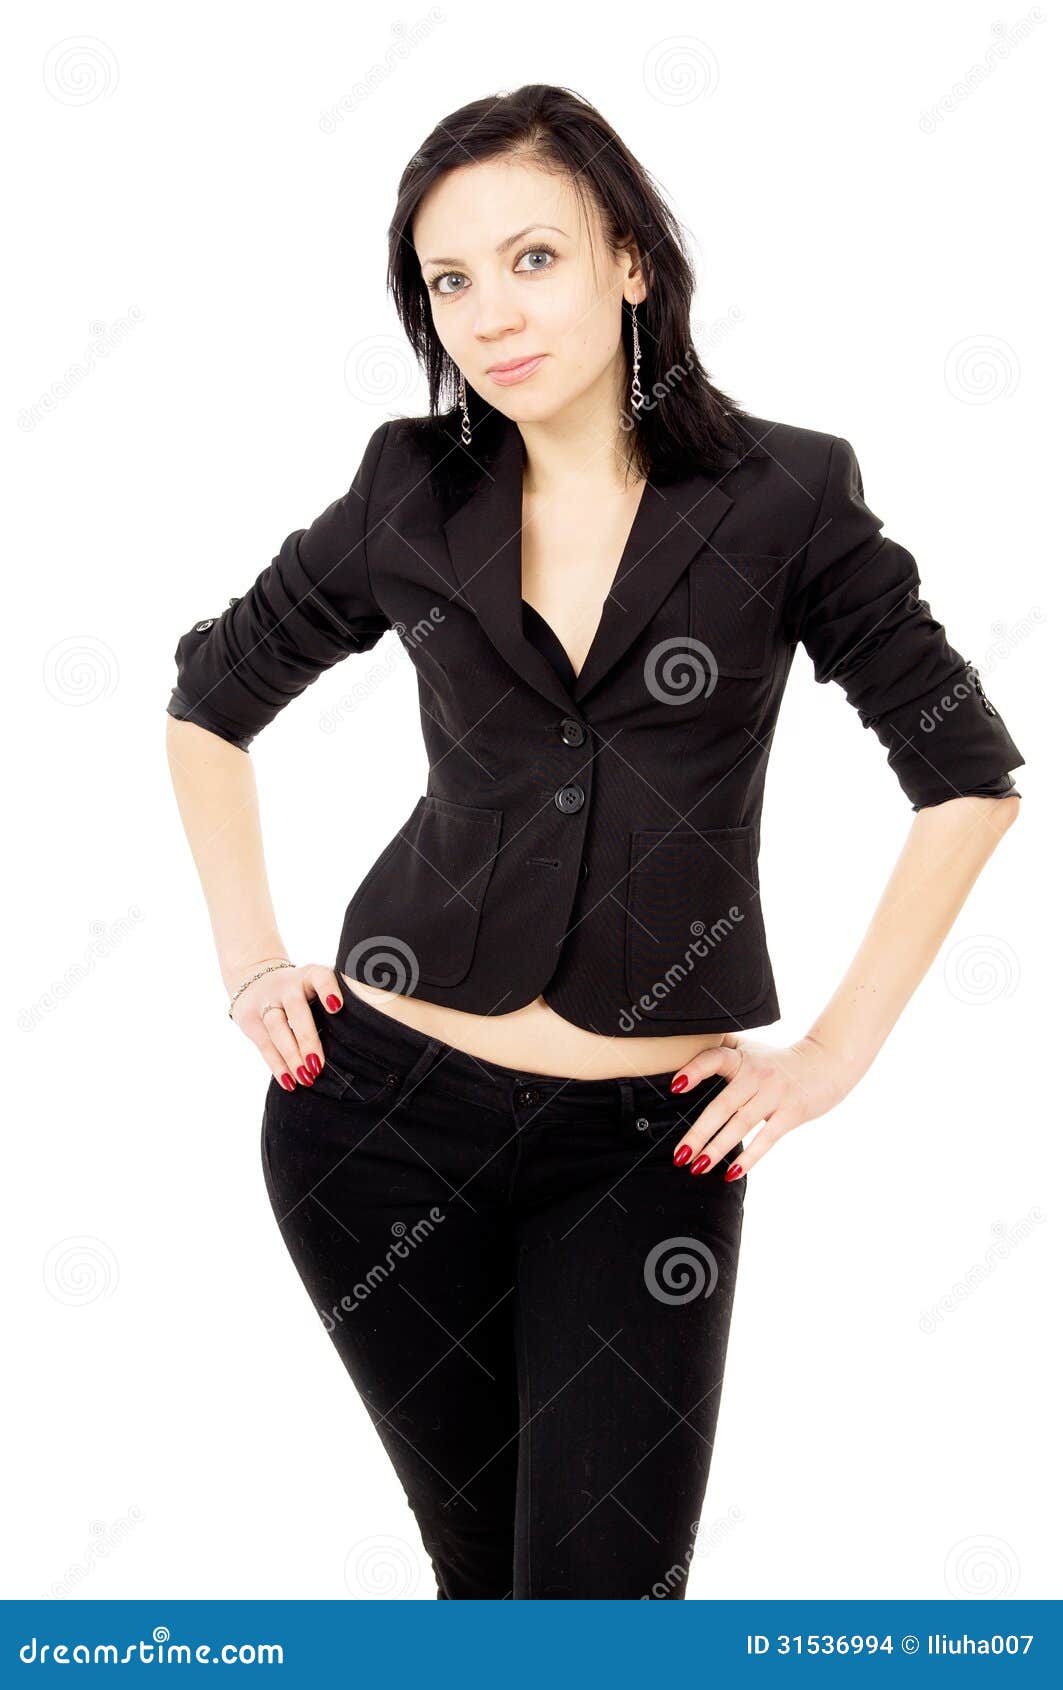 Slim Young Girl in a Smart Suit Stock Photo - Image of isolated ...